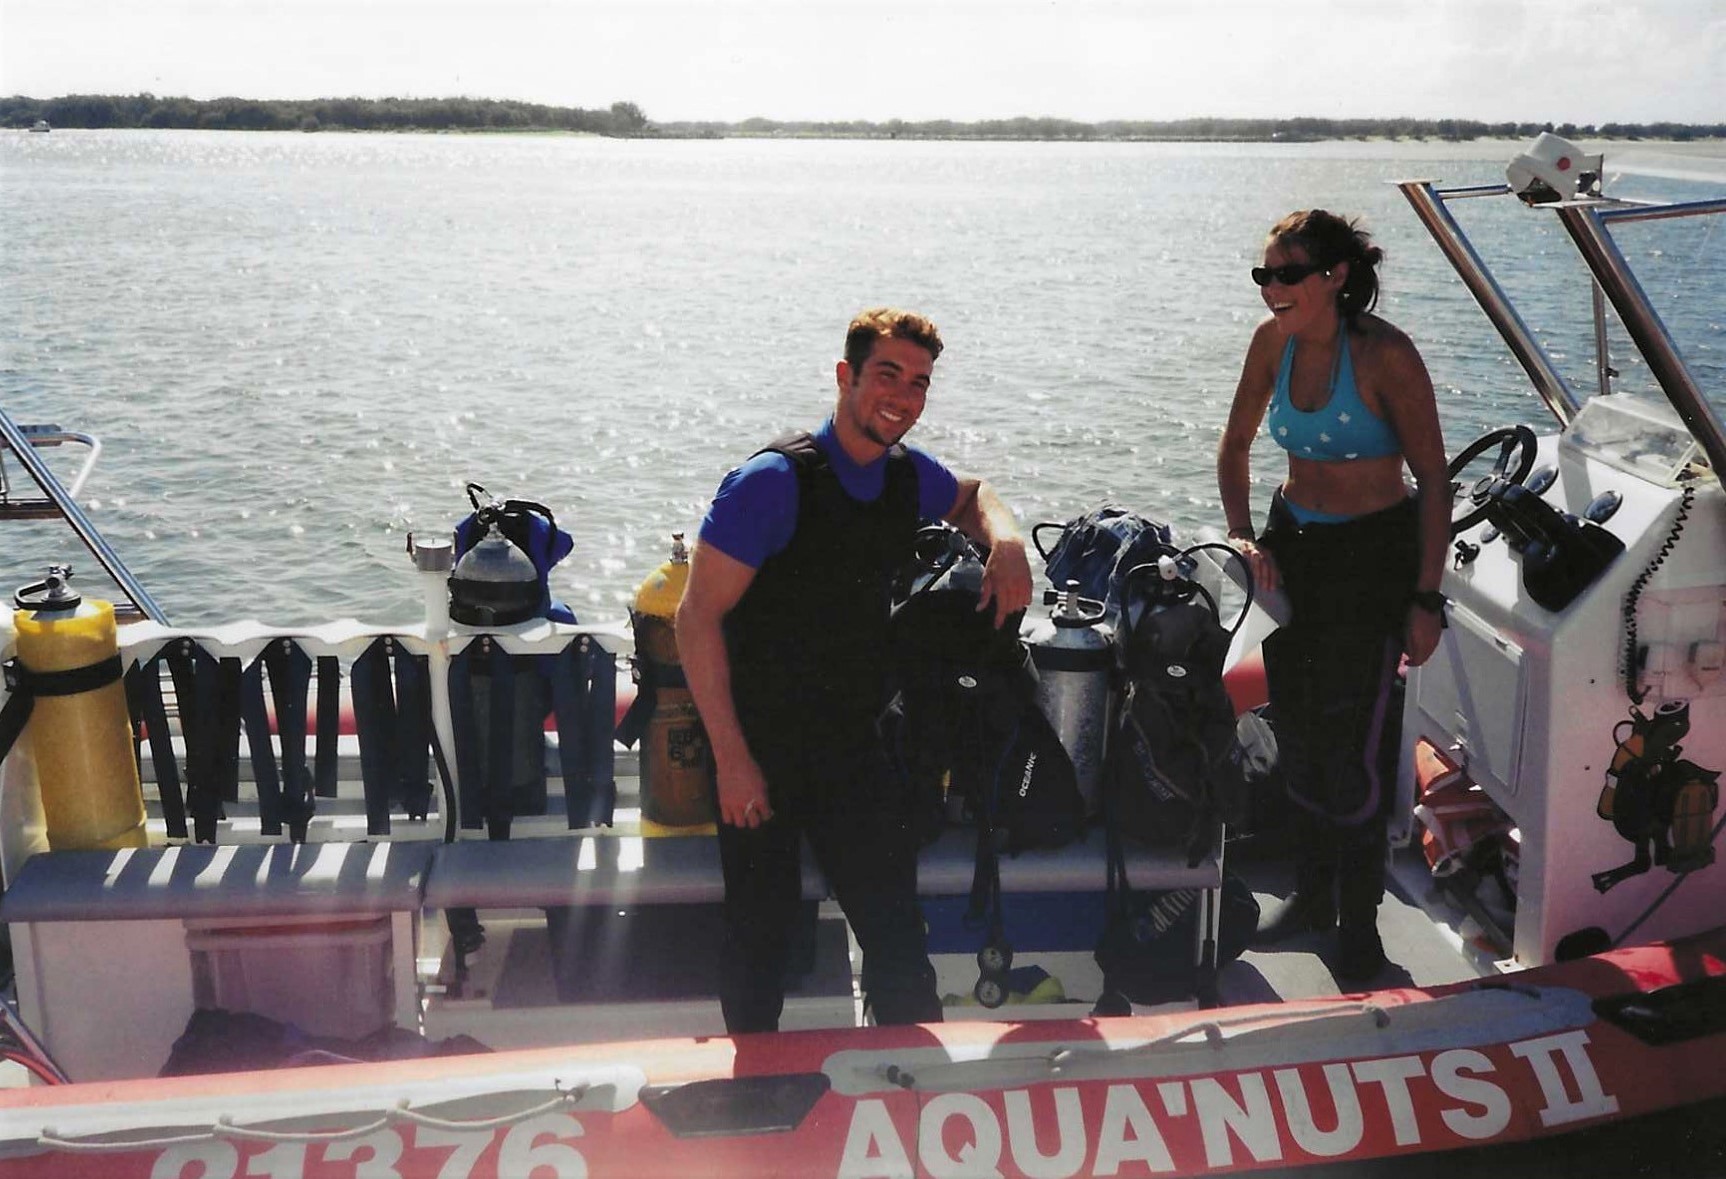 Brandon coming back from diving The Great Barrier Reef, Australia.